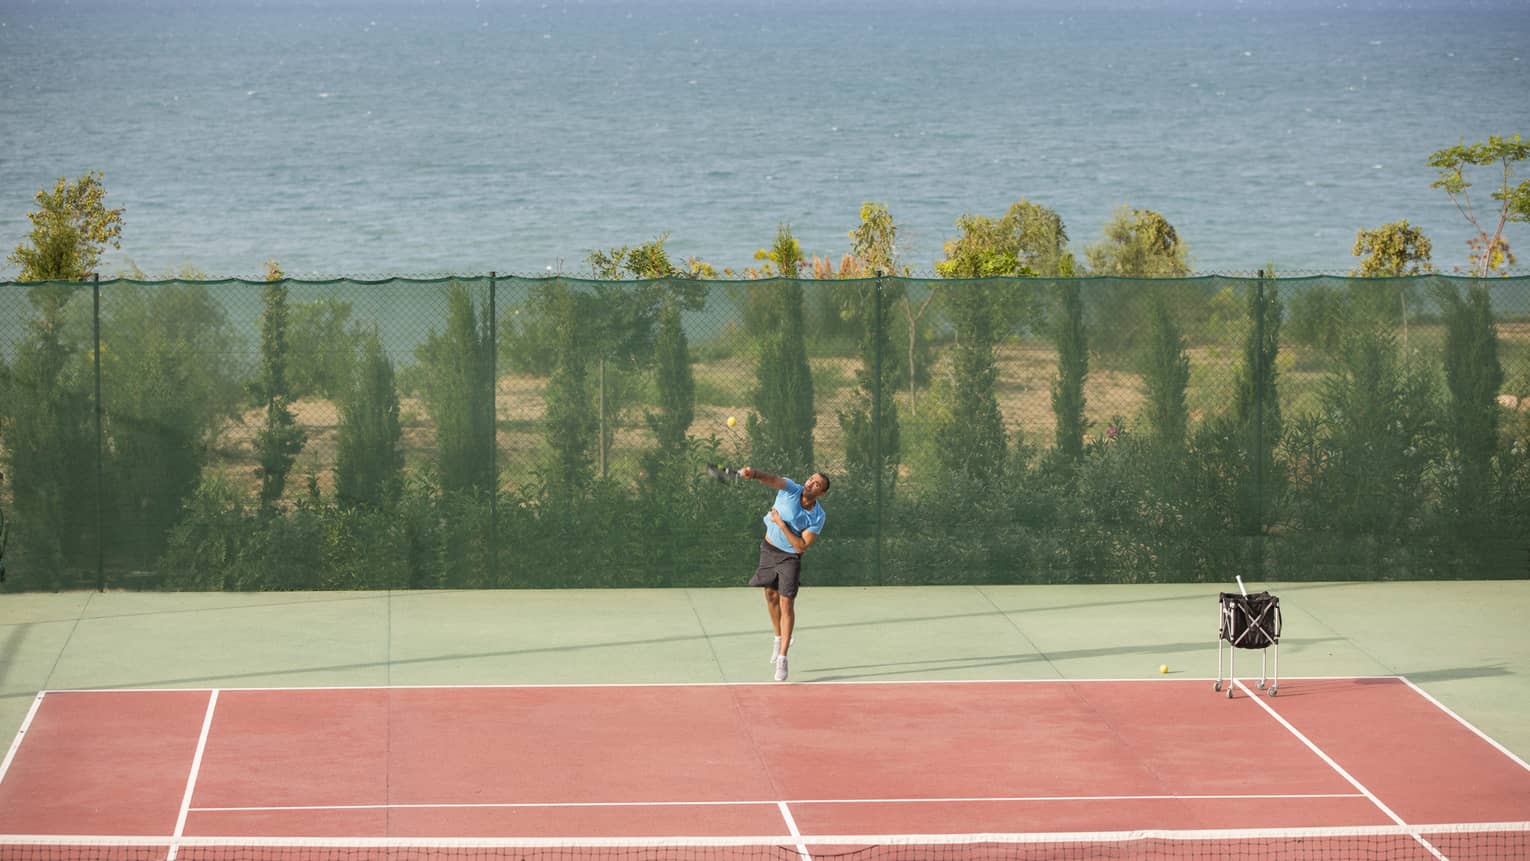 Man in blue shirt and black shorts serving a tennis ball on a seafront tennis court